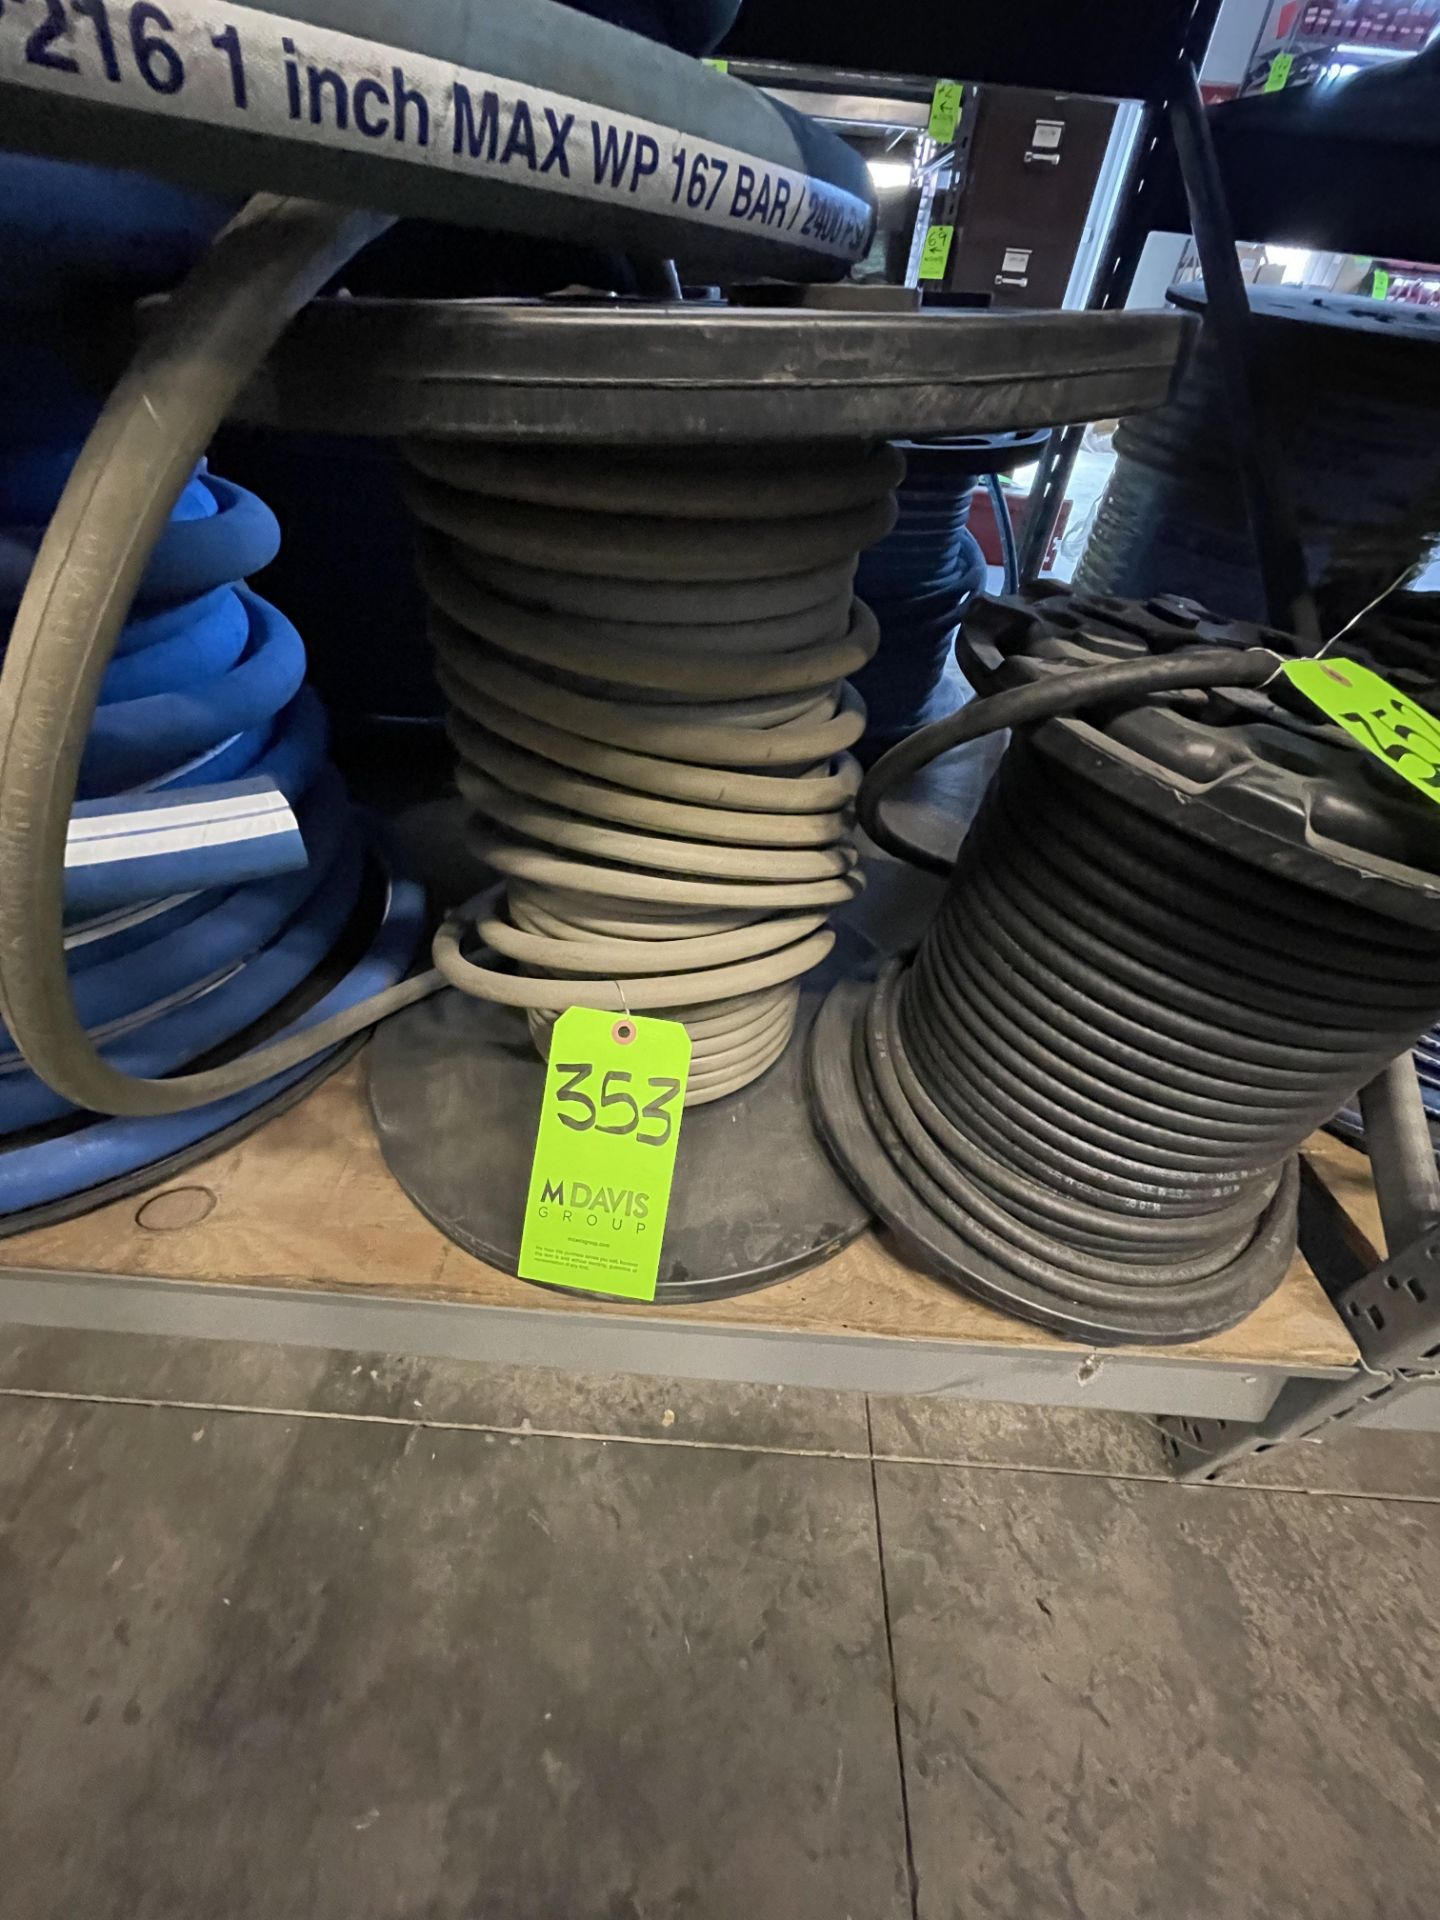 PRESSURE WASHER HOSE 3/8" 3000psi (ALL PURCHASES MUST BE PAID FOR AND REMOVED BY 5/4/22) (ALL